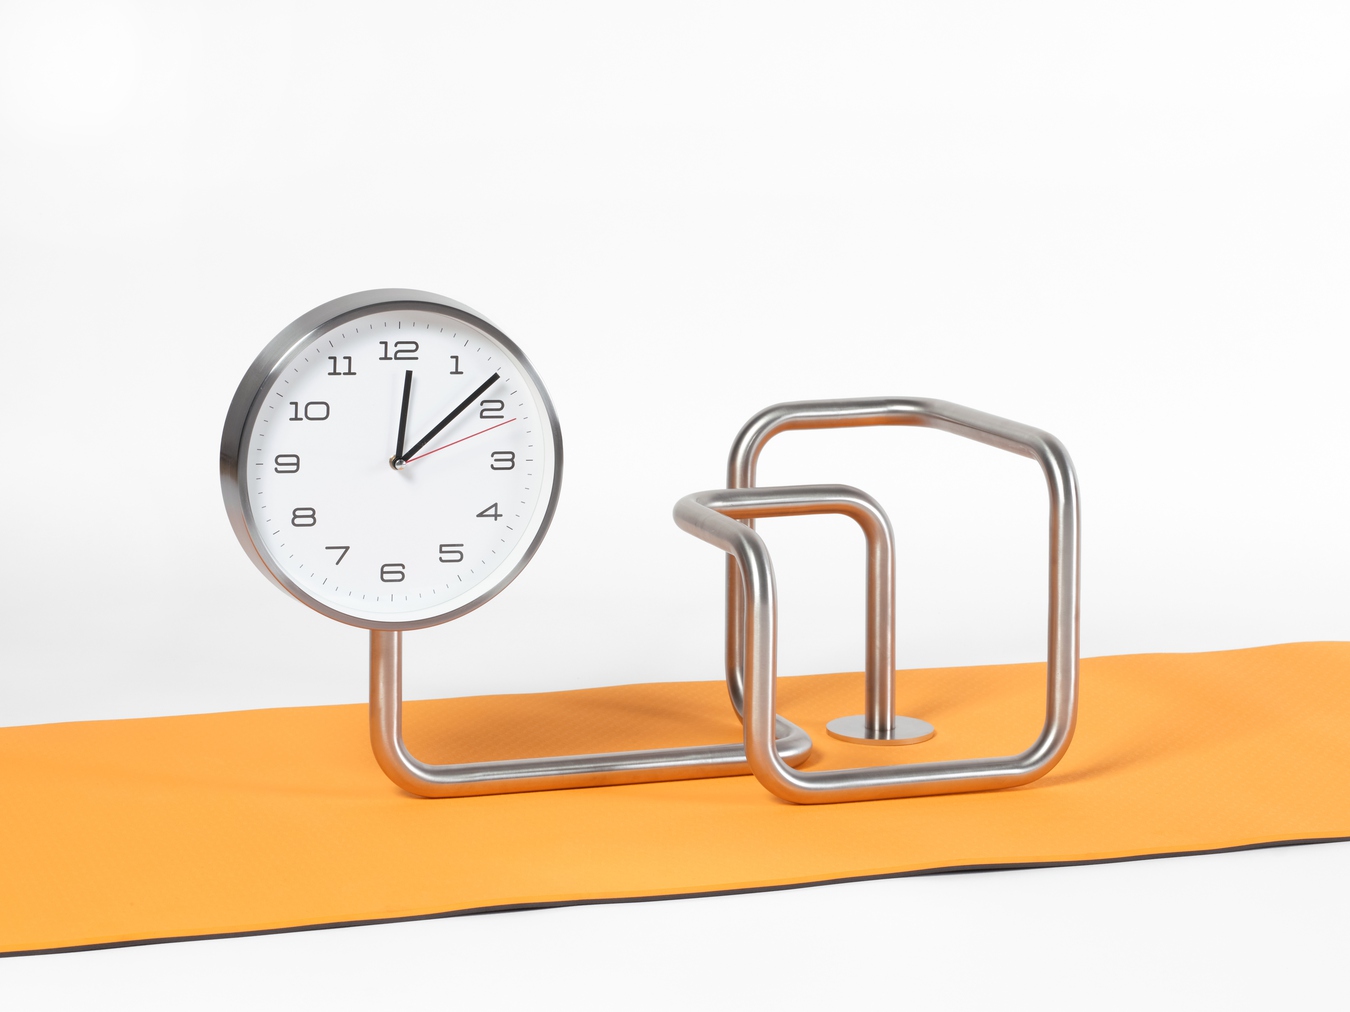 Image: Yona Lee, Clock in Practice, 2023. Clock, stainless steel. 68 x 29 x 40cm. Photo by Sam Hartnett. Courtesy of the artist and Fine Arts, Sydney.